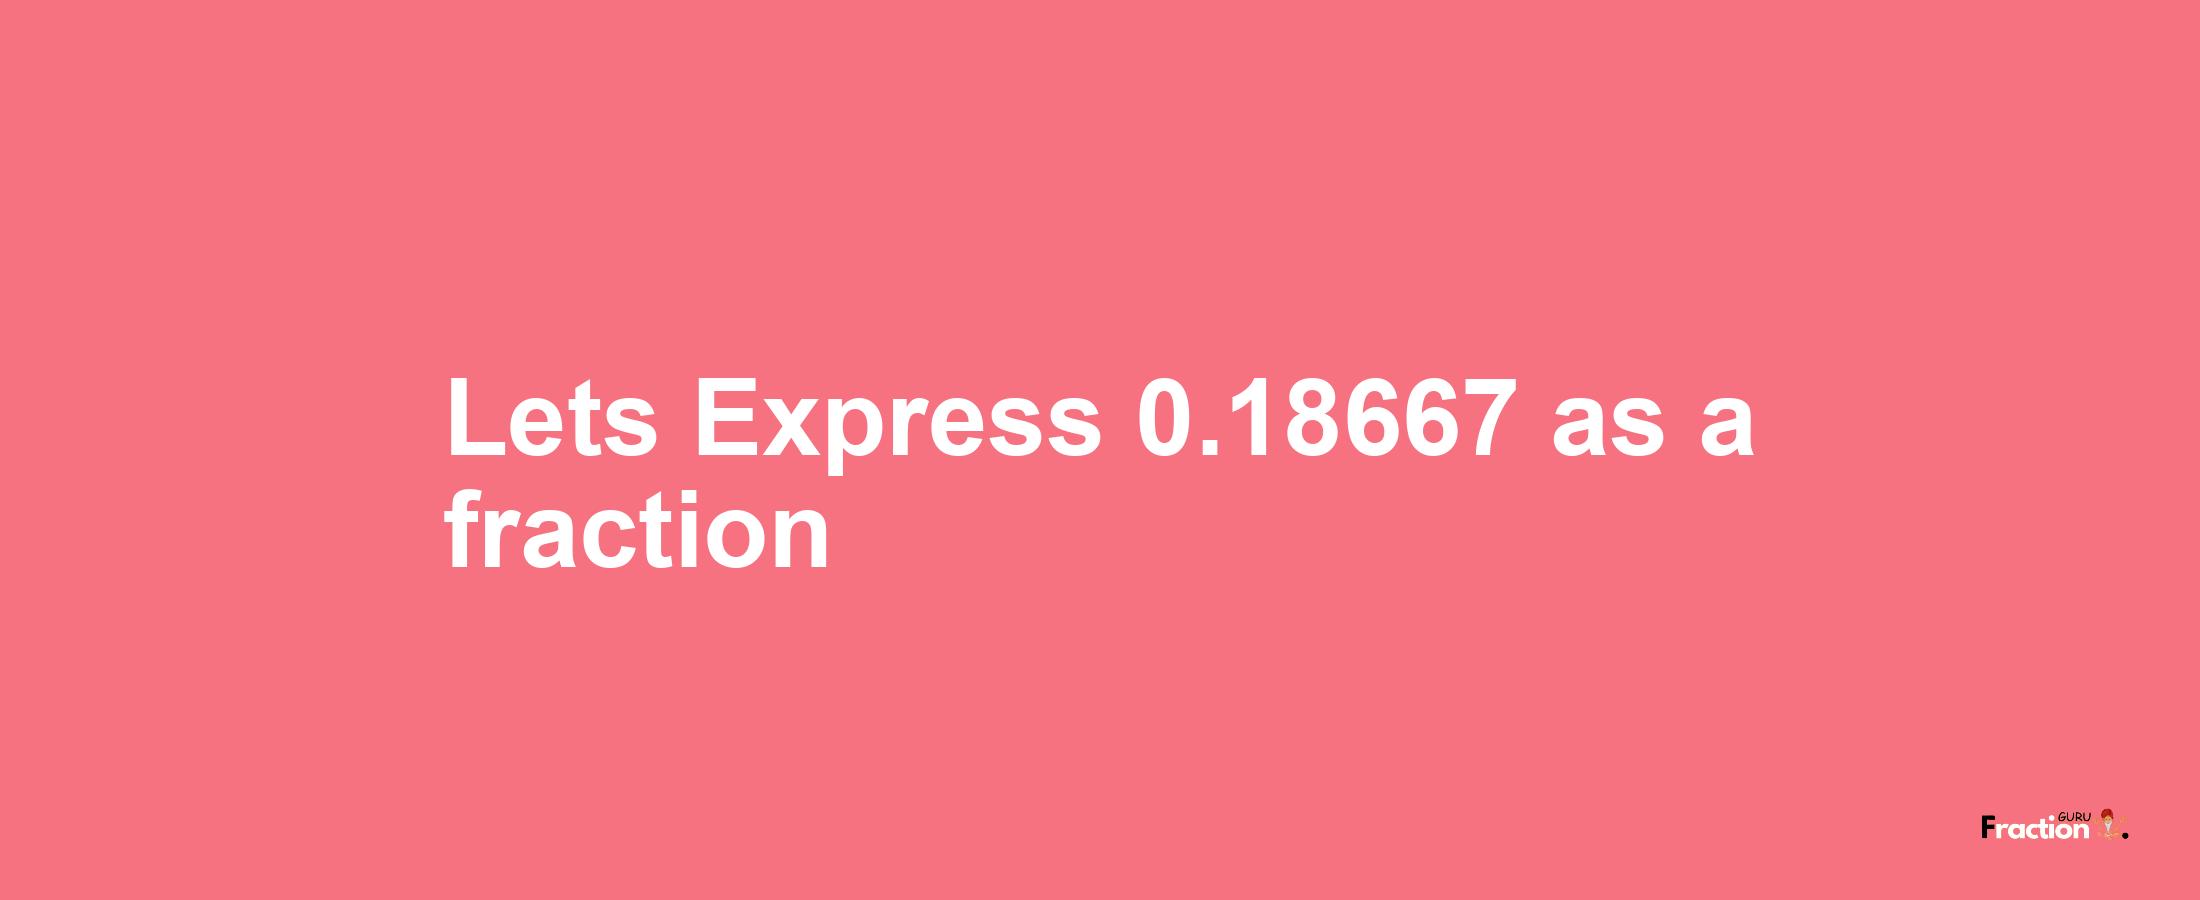 Lets Express 0.18667 as afraction